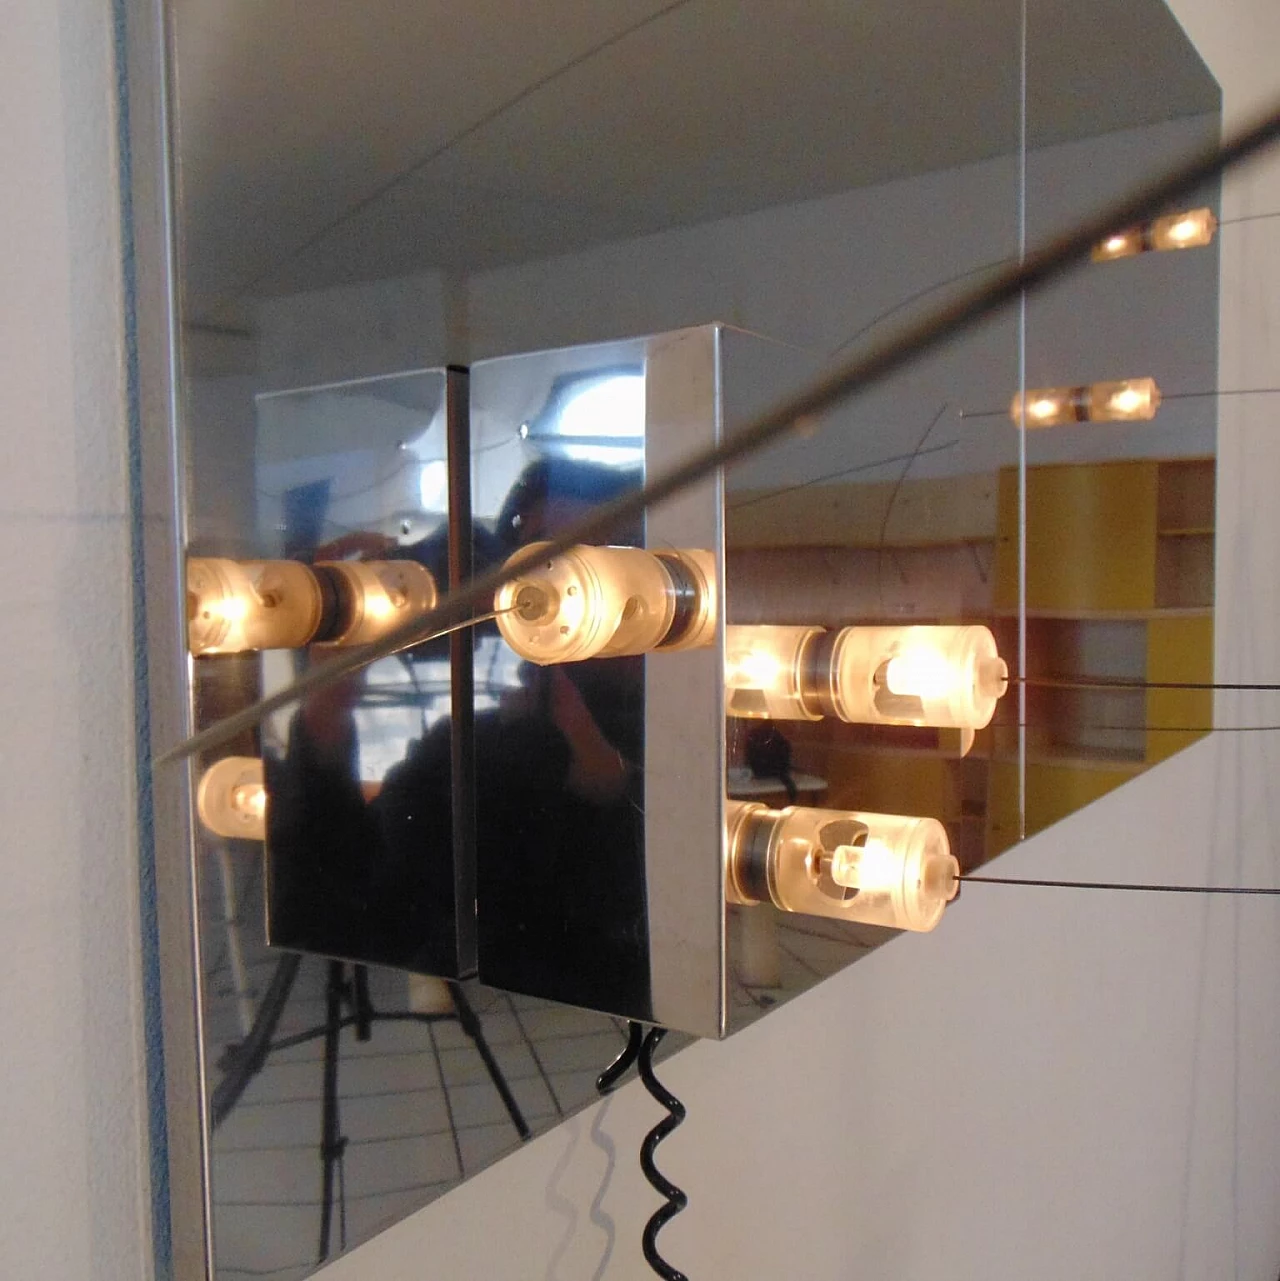 Mirrored Wall Lamp with Magnetic Movable Lights by ARDITI, Sormani Nucleo, Italy 1069176